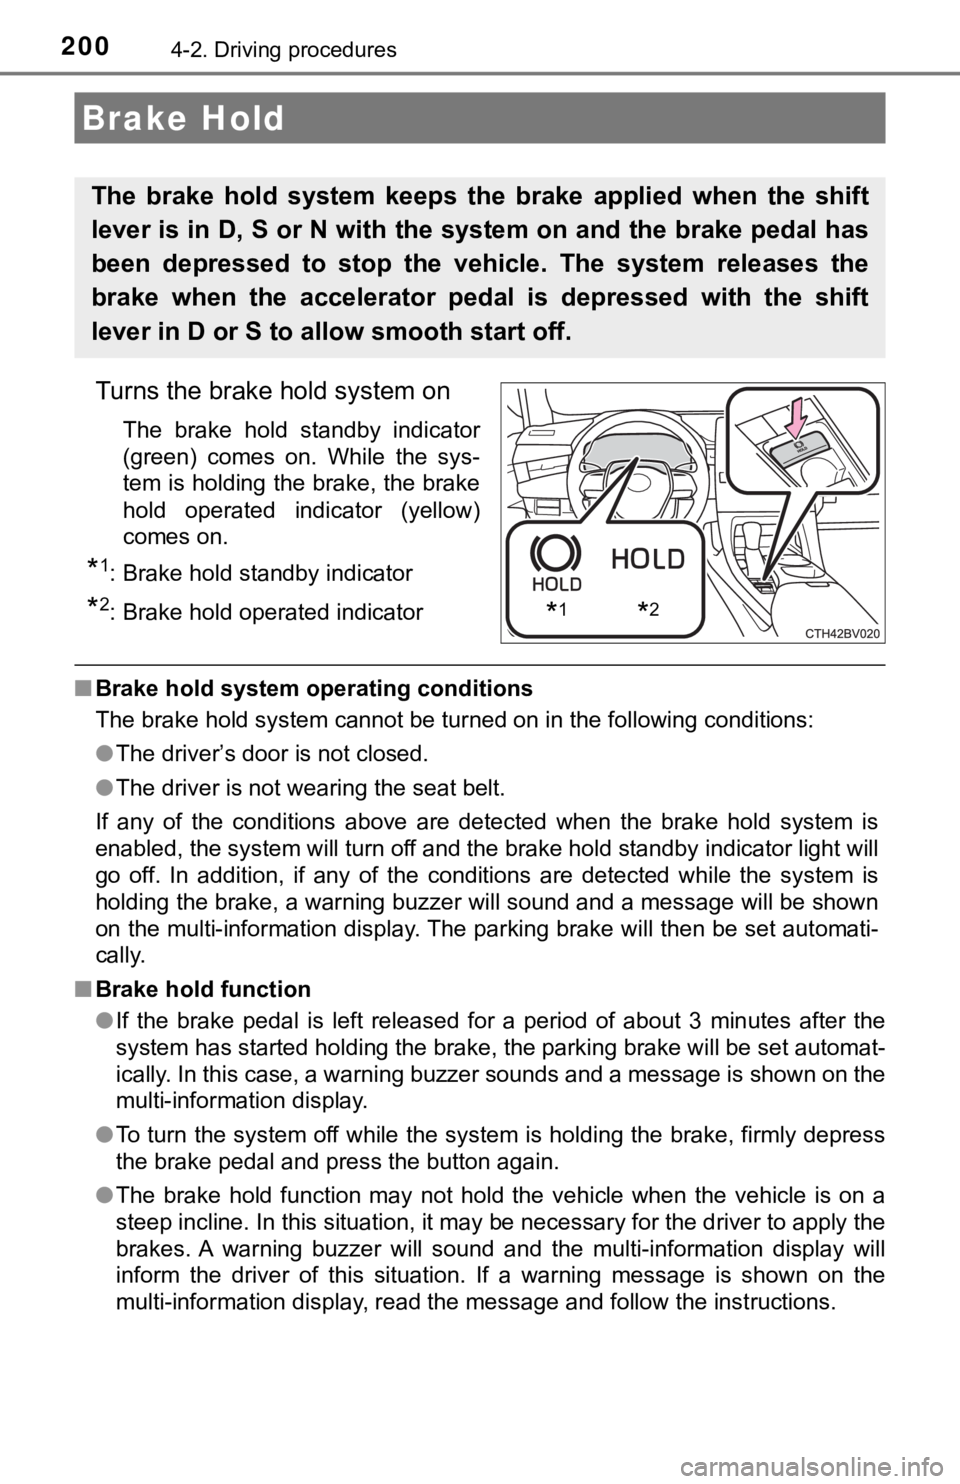 TOYOTA AVALON 2020  Owners Manual (in English) 2004-2. Driving procedures
Turns the brake hold system on
The  brake  hold  standby  indicator
(green)  comes  on.  While  the  sys-
tem is holding the brake, the brake
hold  operated  indicator  (yel